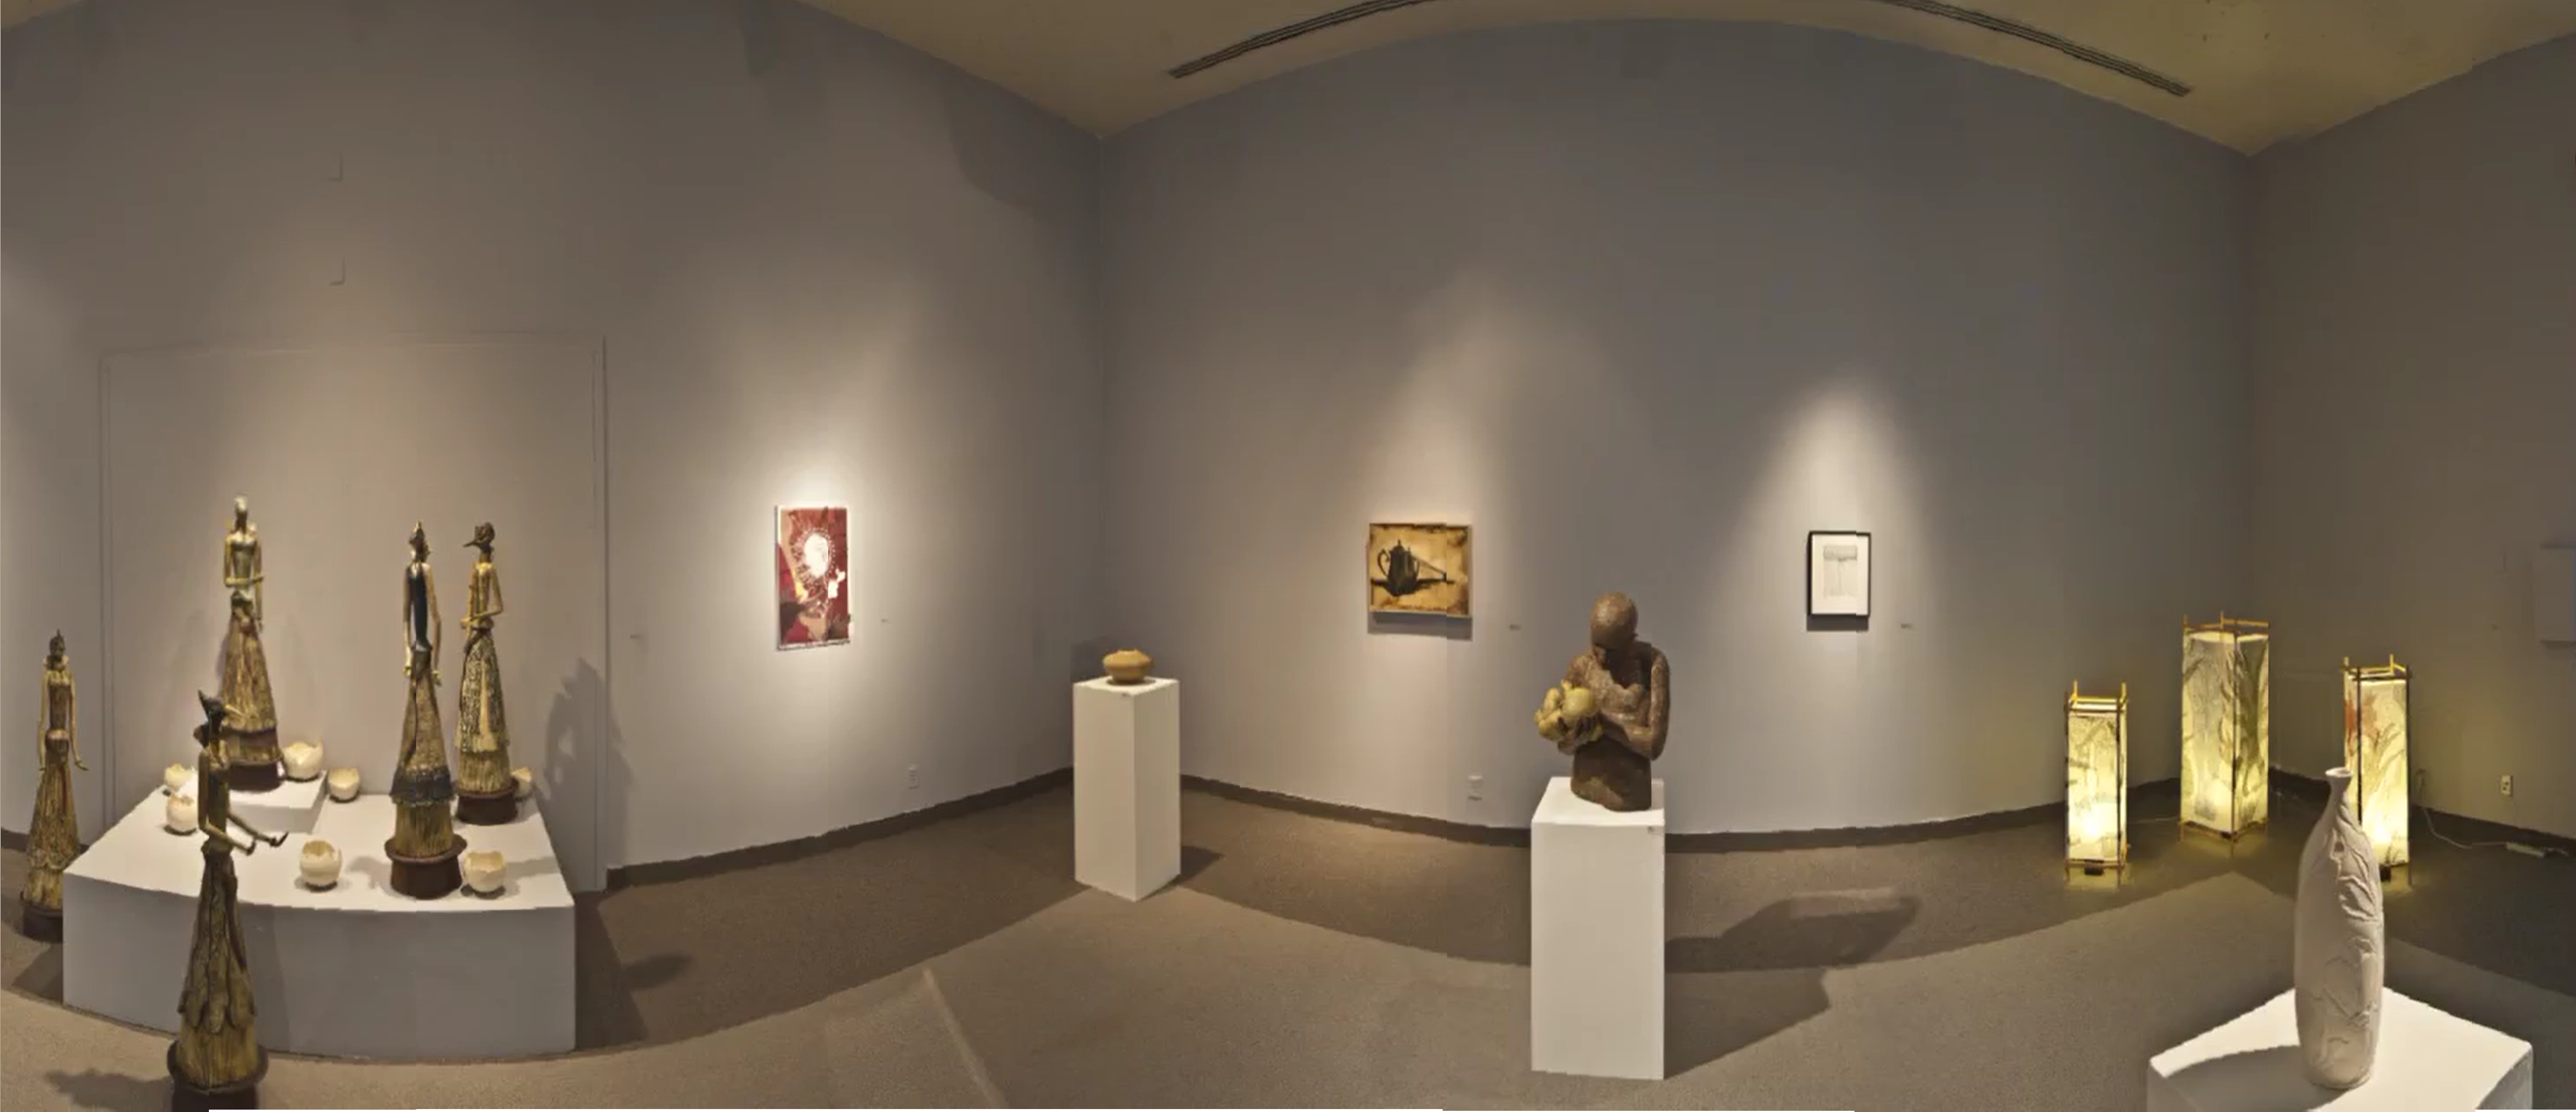 Installation View, Front West Gallery, Ink & Clay 36 Exhibition, Mar. 18, 2010 to May. 1, 2010.